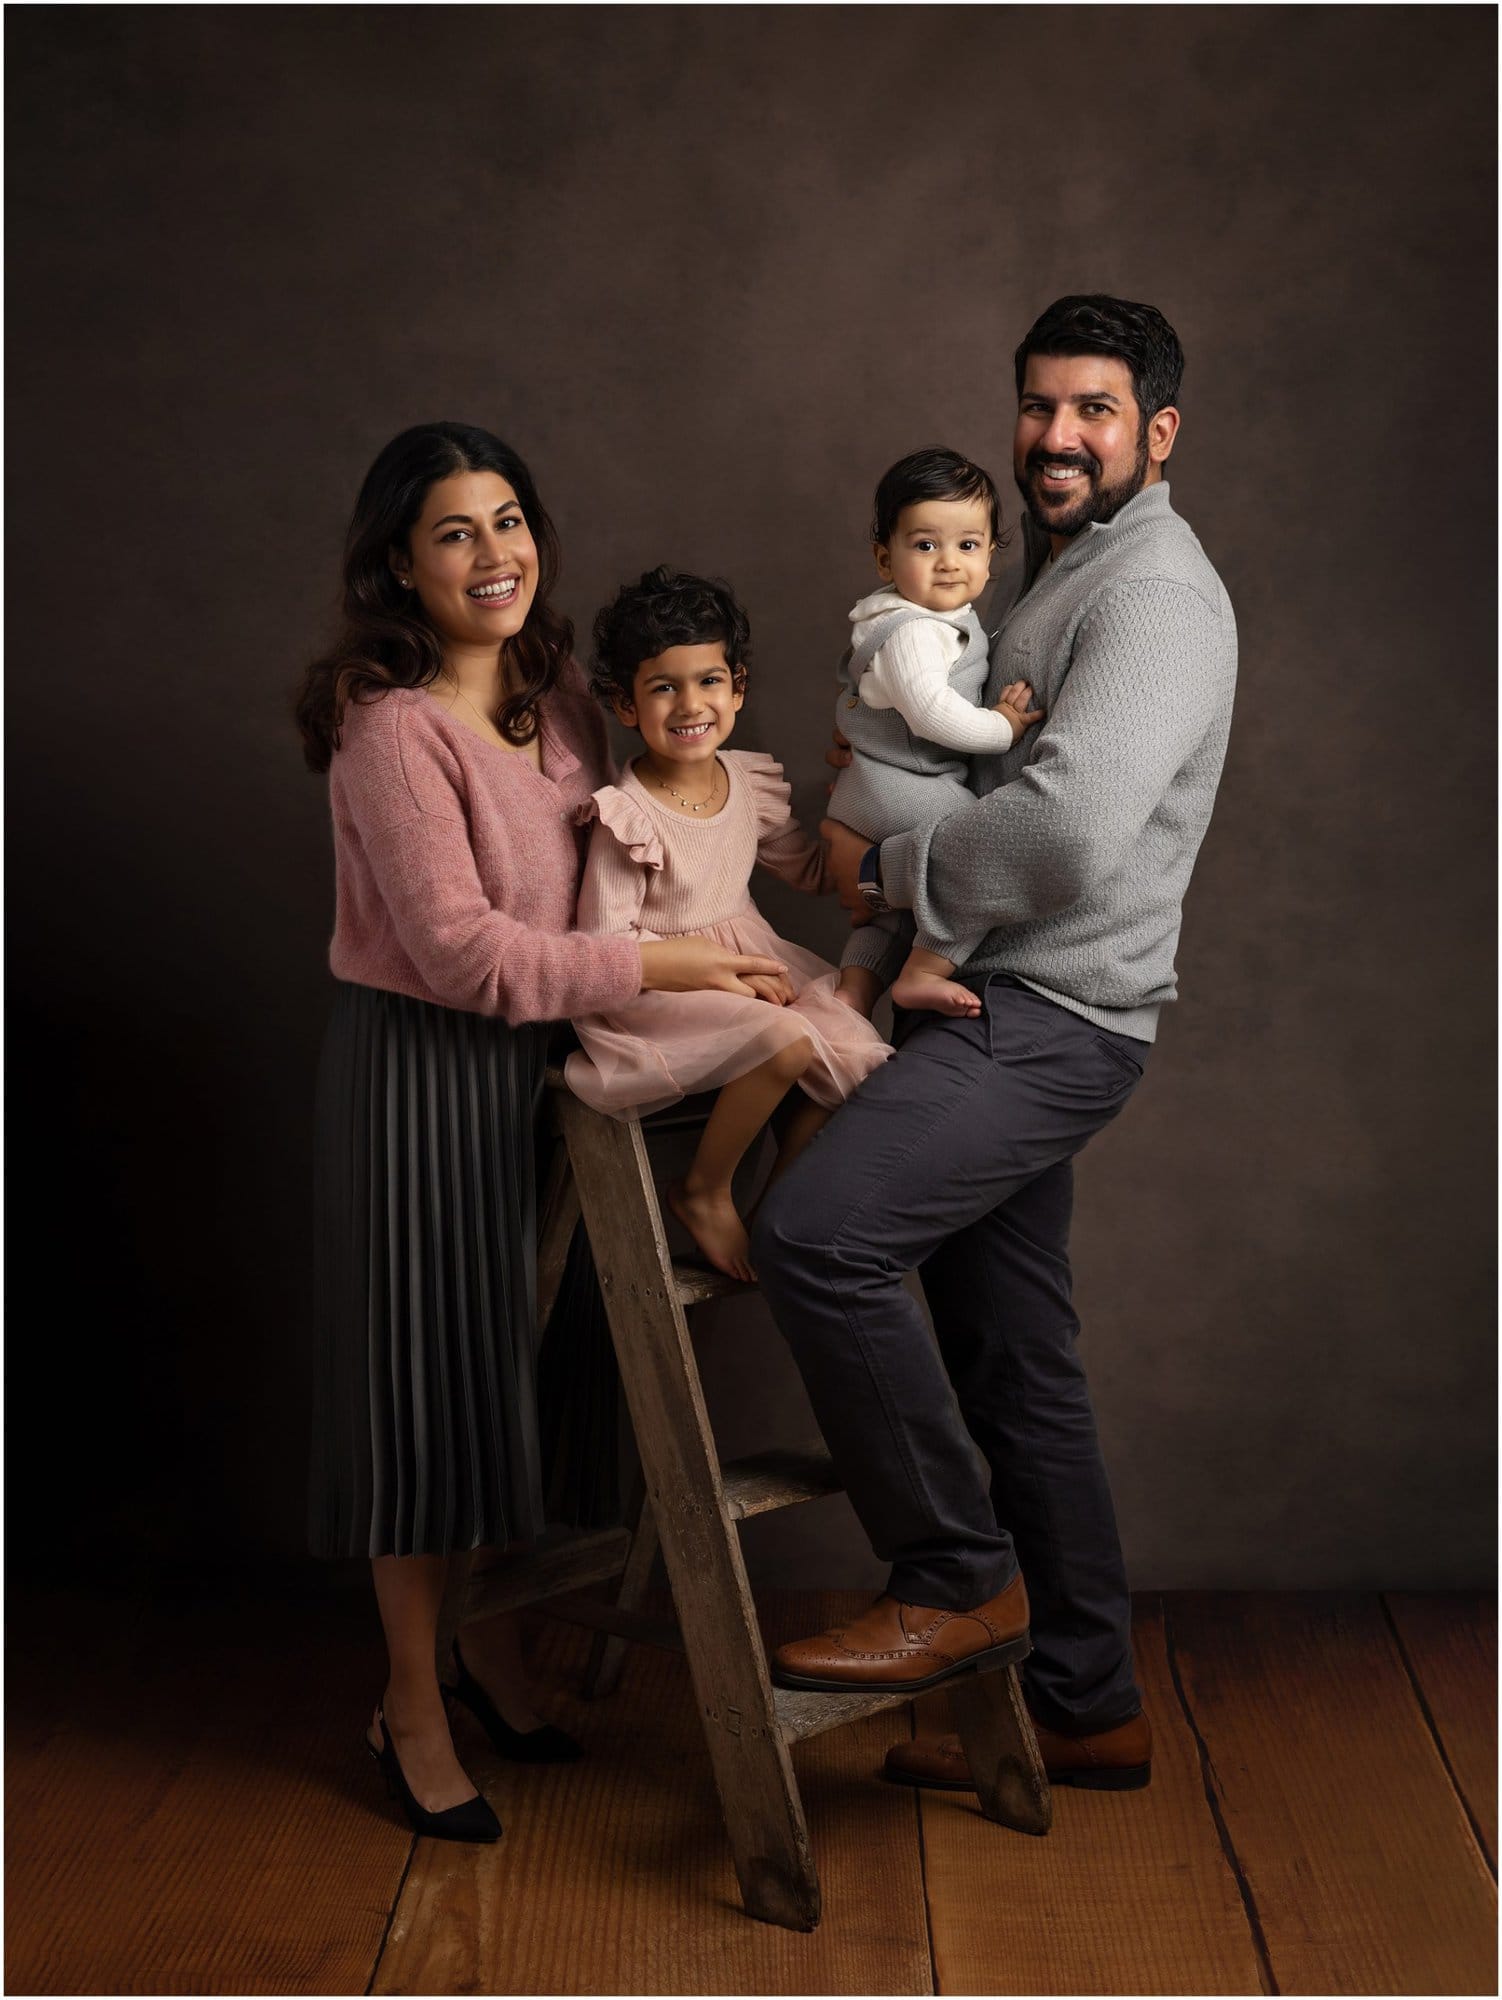 Beautiful family with young children smile during family portrait on brown background